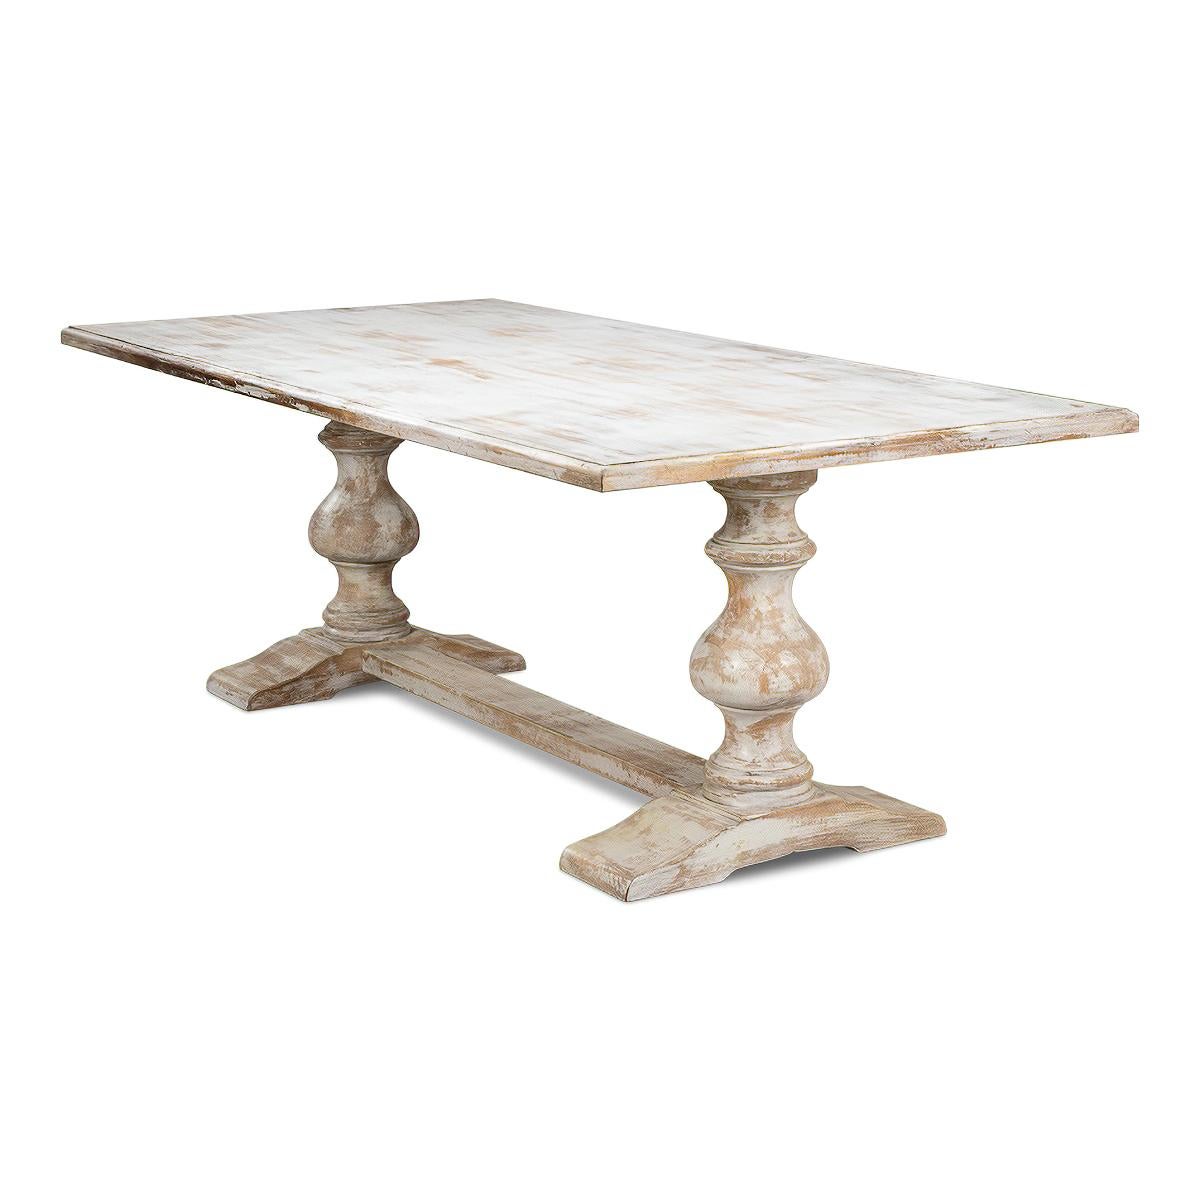 Rustic French Provincial Refectory Table For Sale